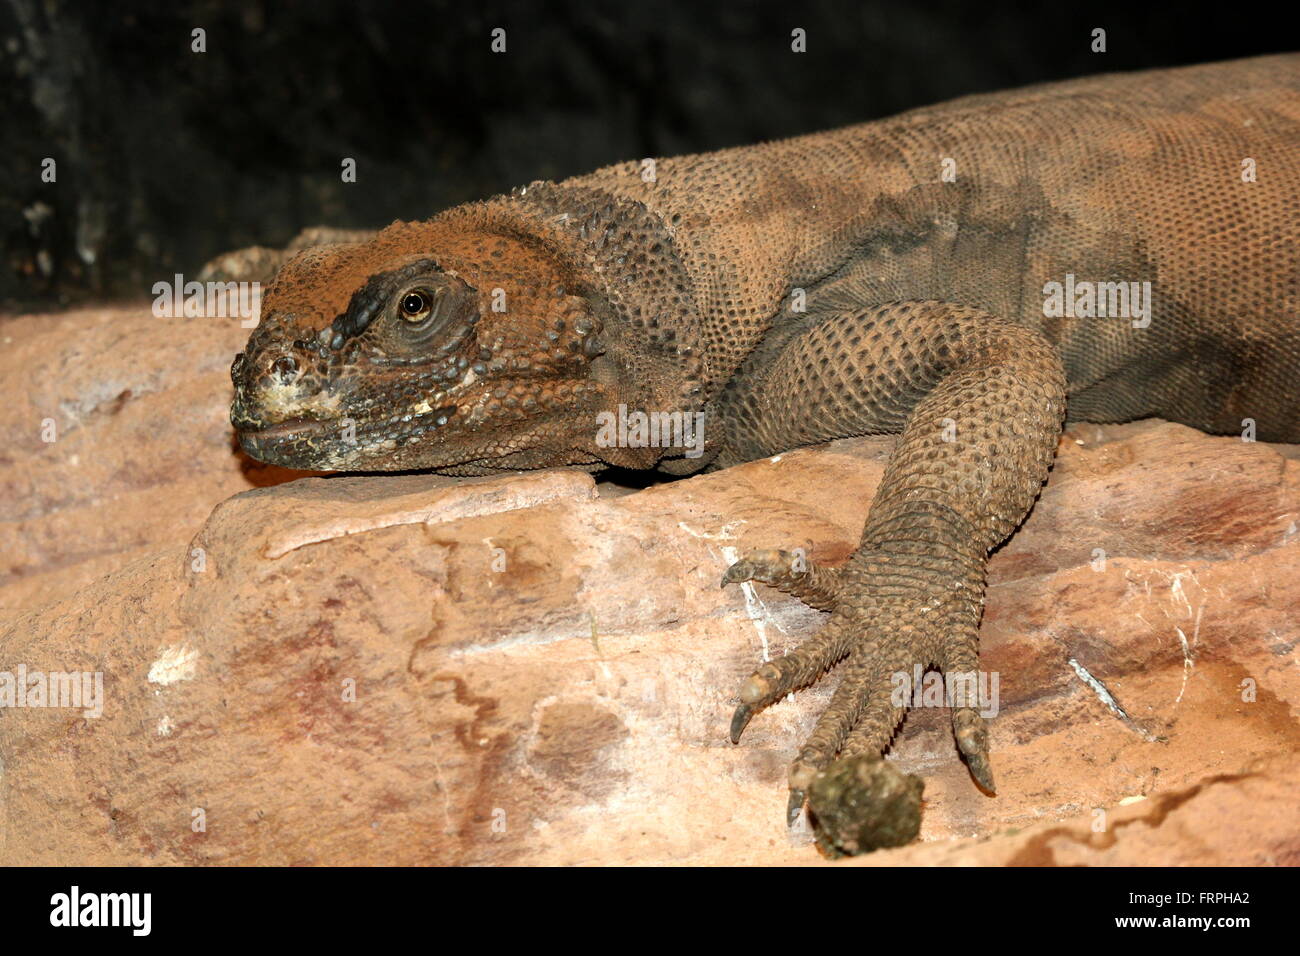 North American Common Chuckwalla (Sauromalus ater), closeup of head and claws Stock Photo